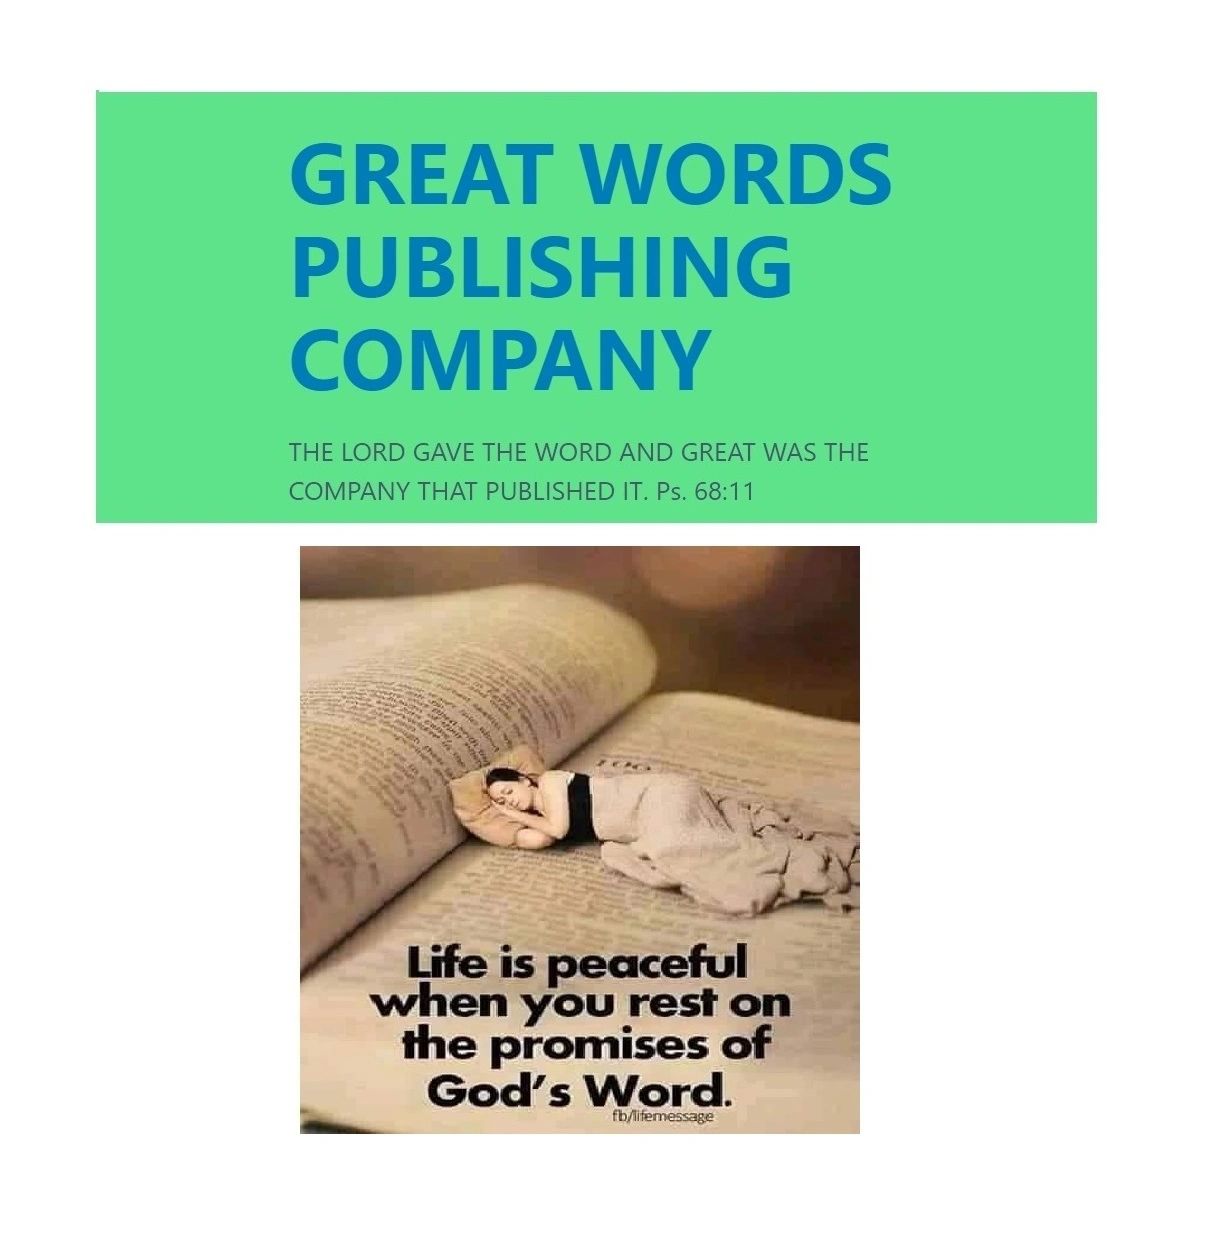 Great Words Publishing Company.
Life is peaceful when you rest on the promises of God´s word